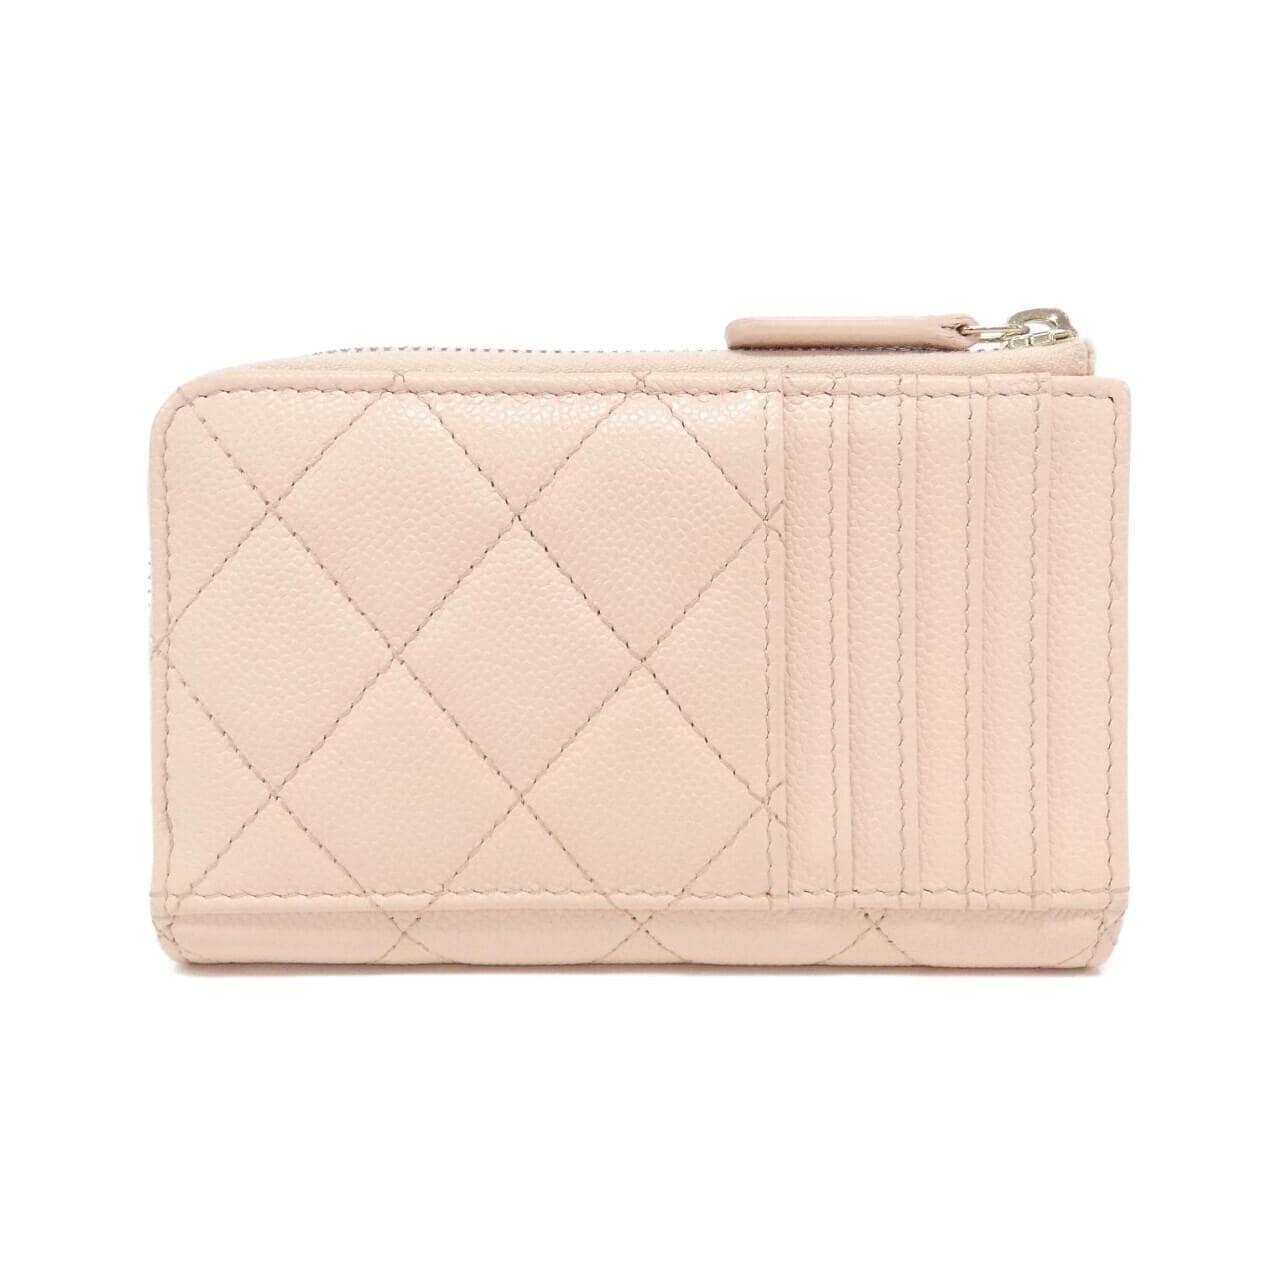 CHANEL Timeless Classic Line AP3179 Card Case